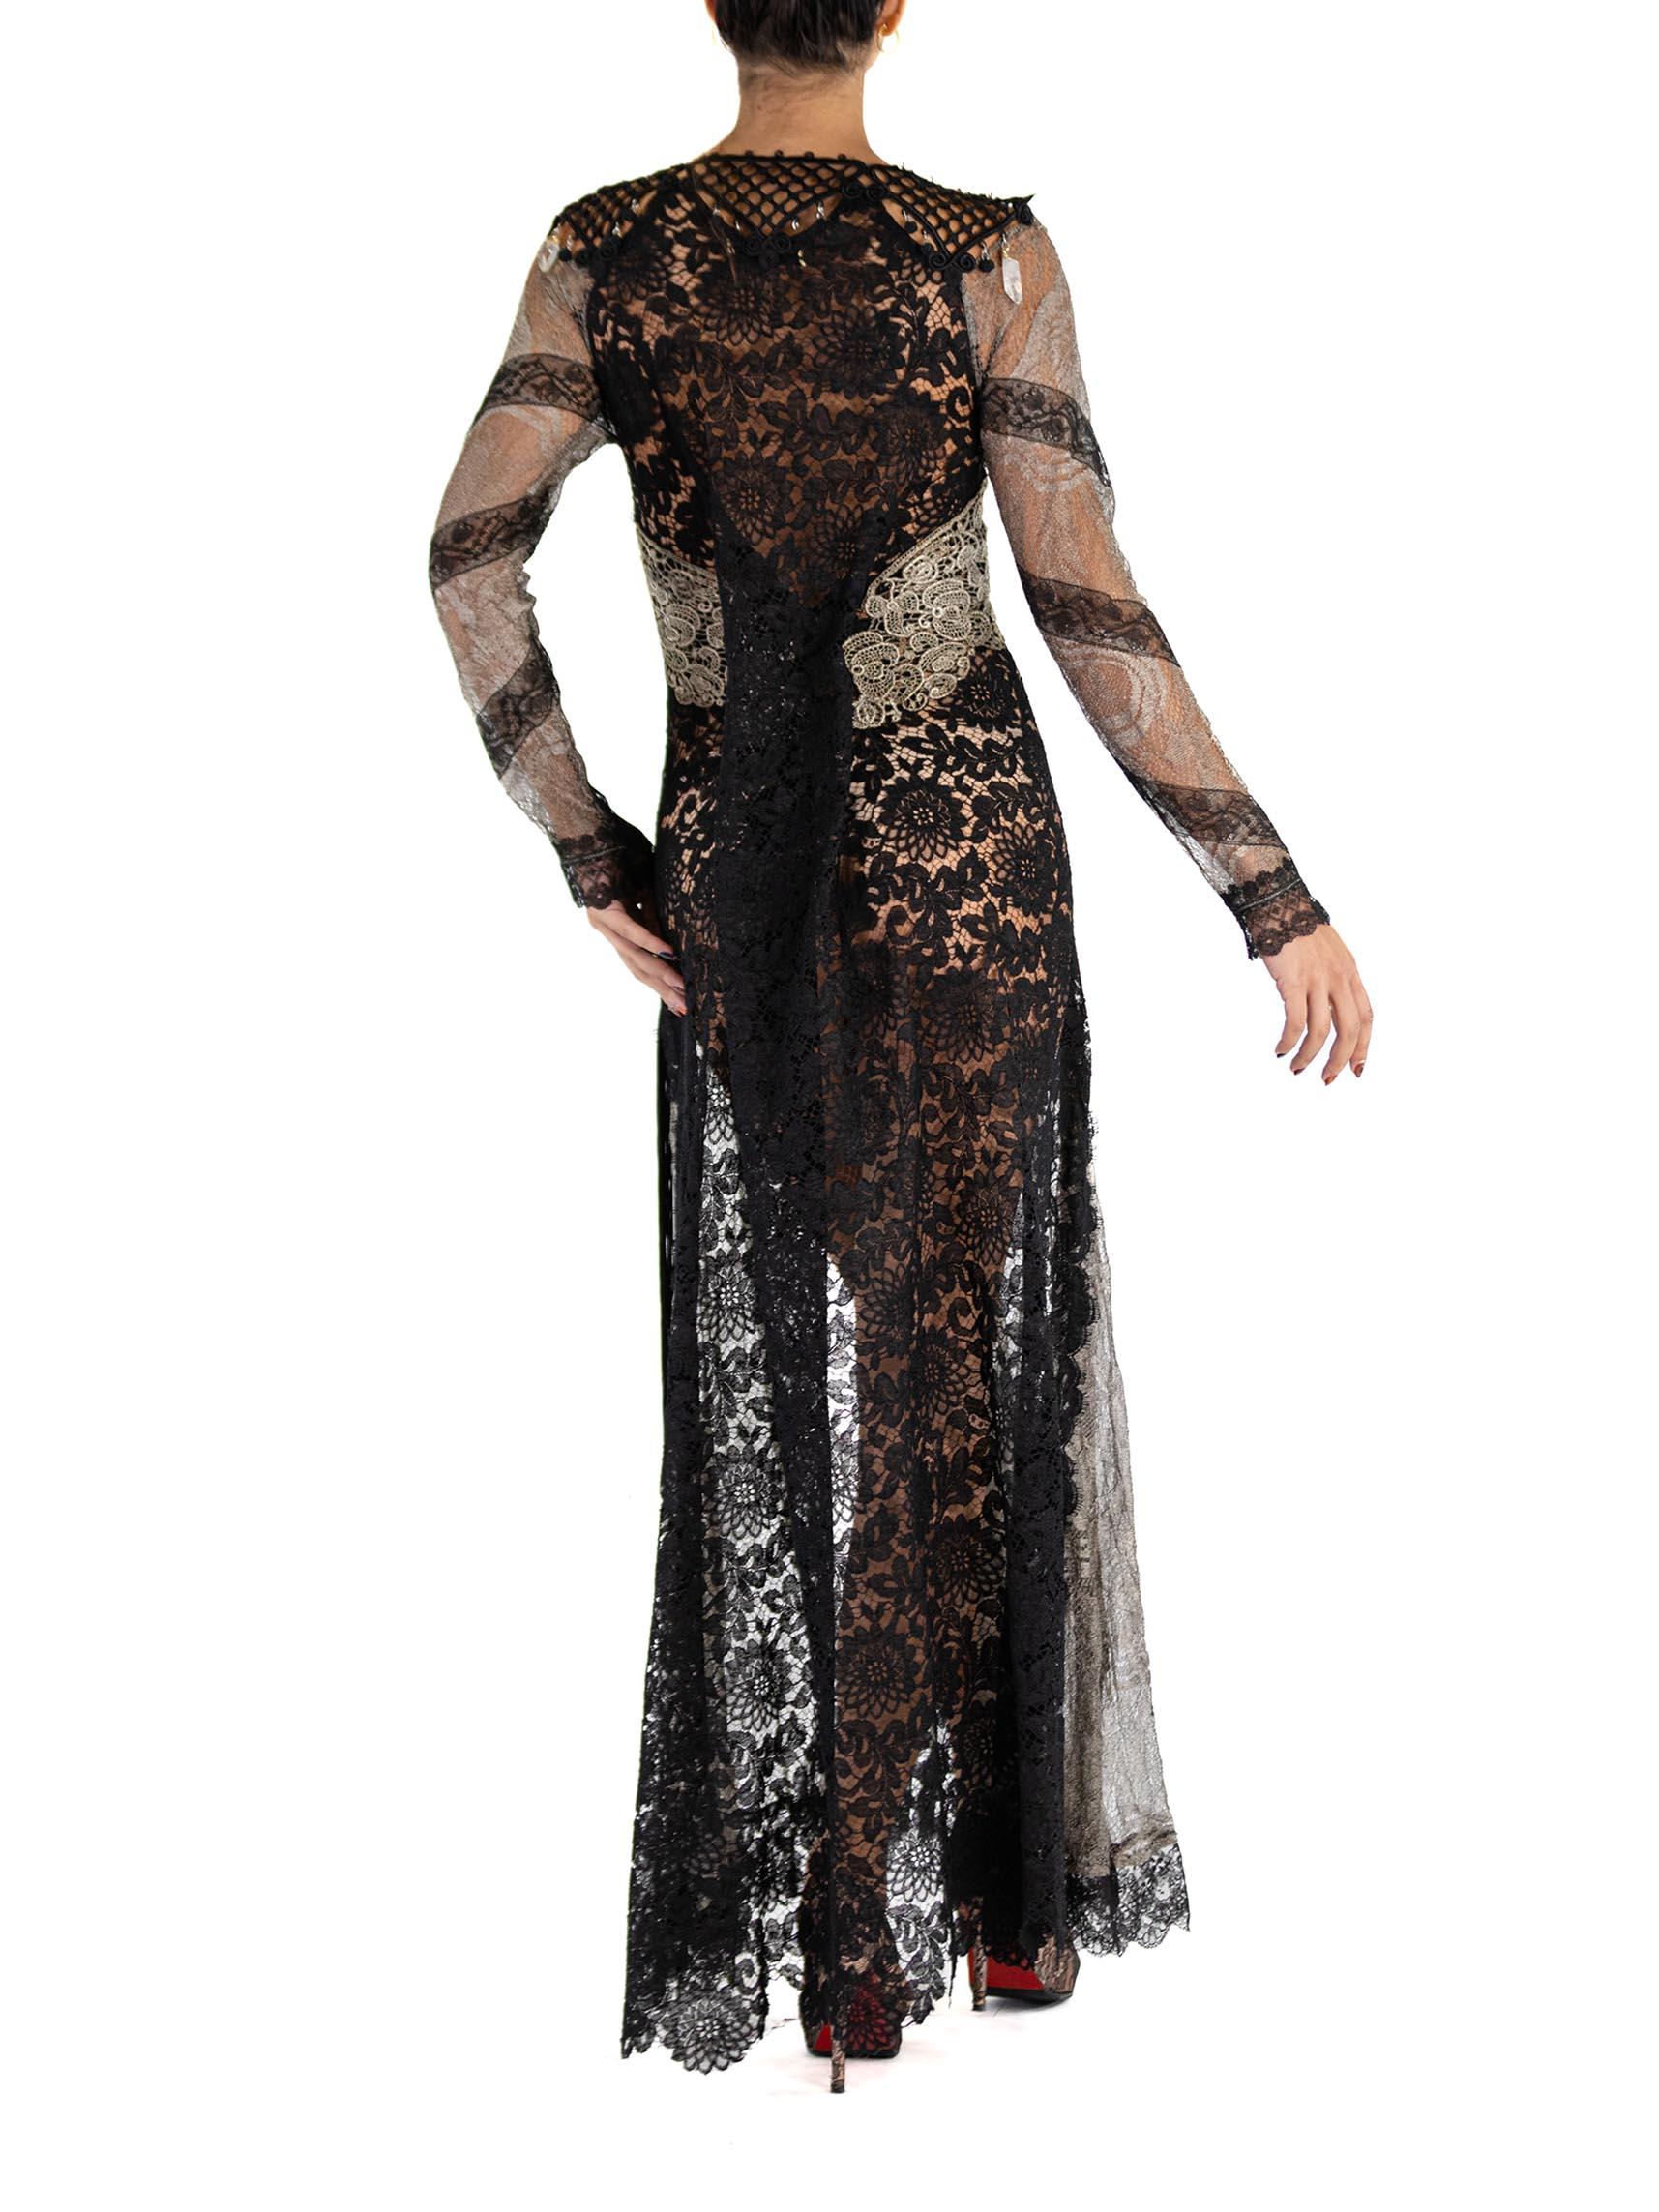 MORPHEW ATELIER Black & Silver Antique Lace Sleeved Gown With Quartz Crystals For Sale 1